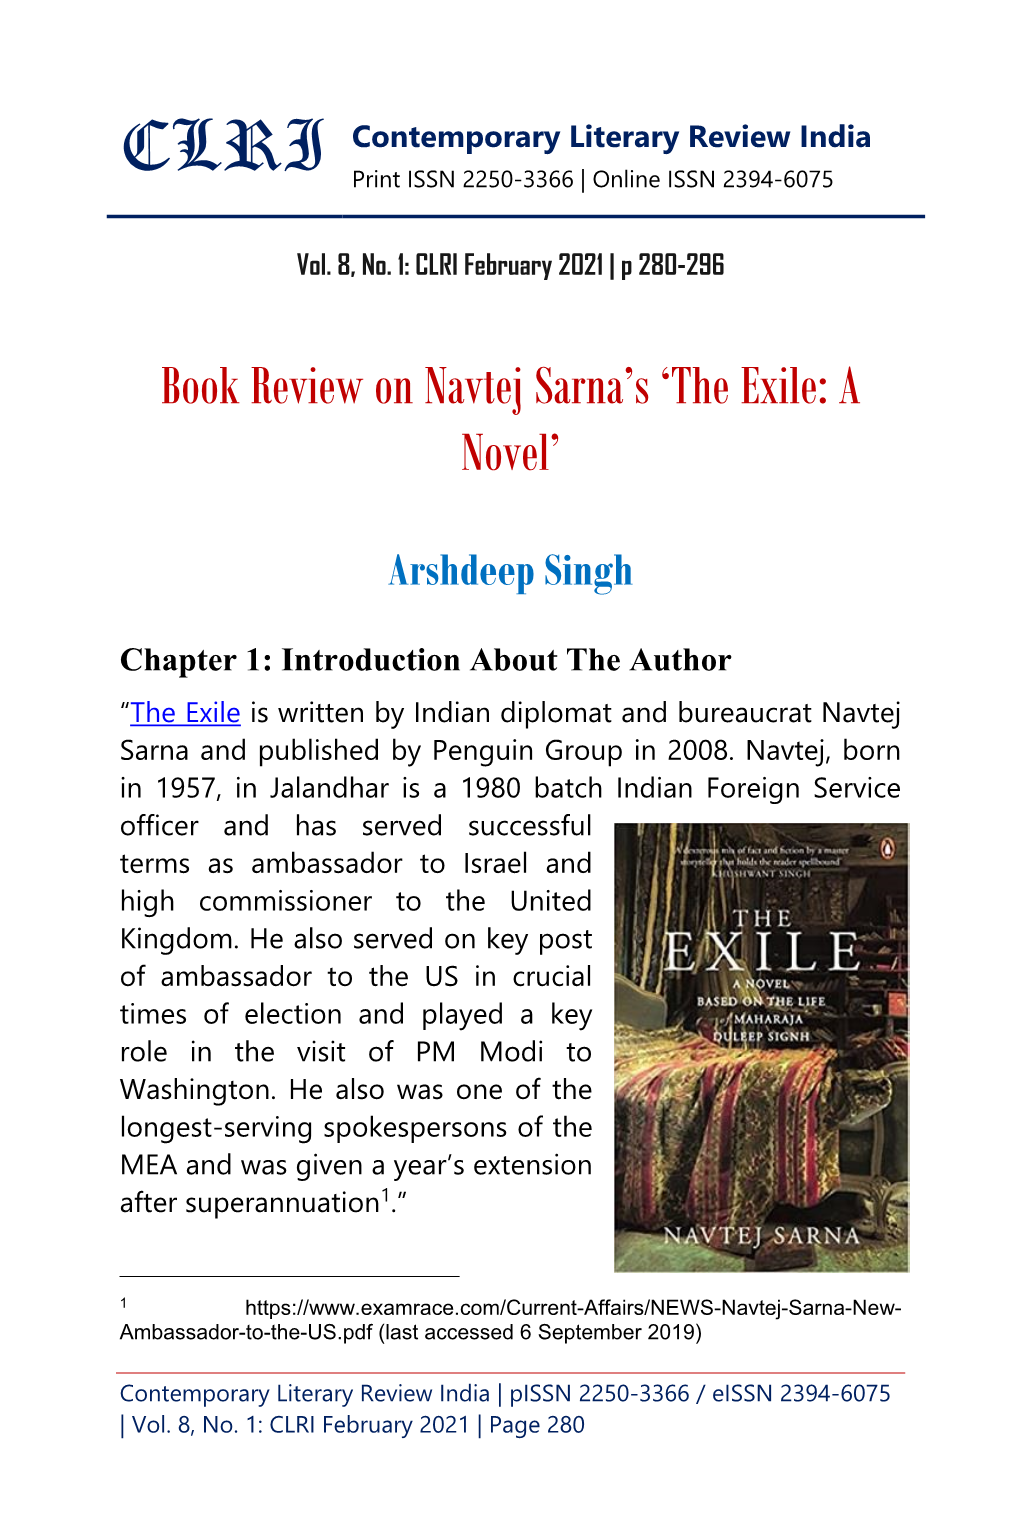 Book Review on Navtej Sarna's 'The Exile: a Novel'